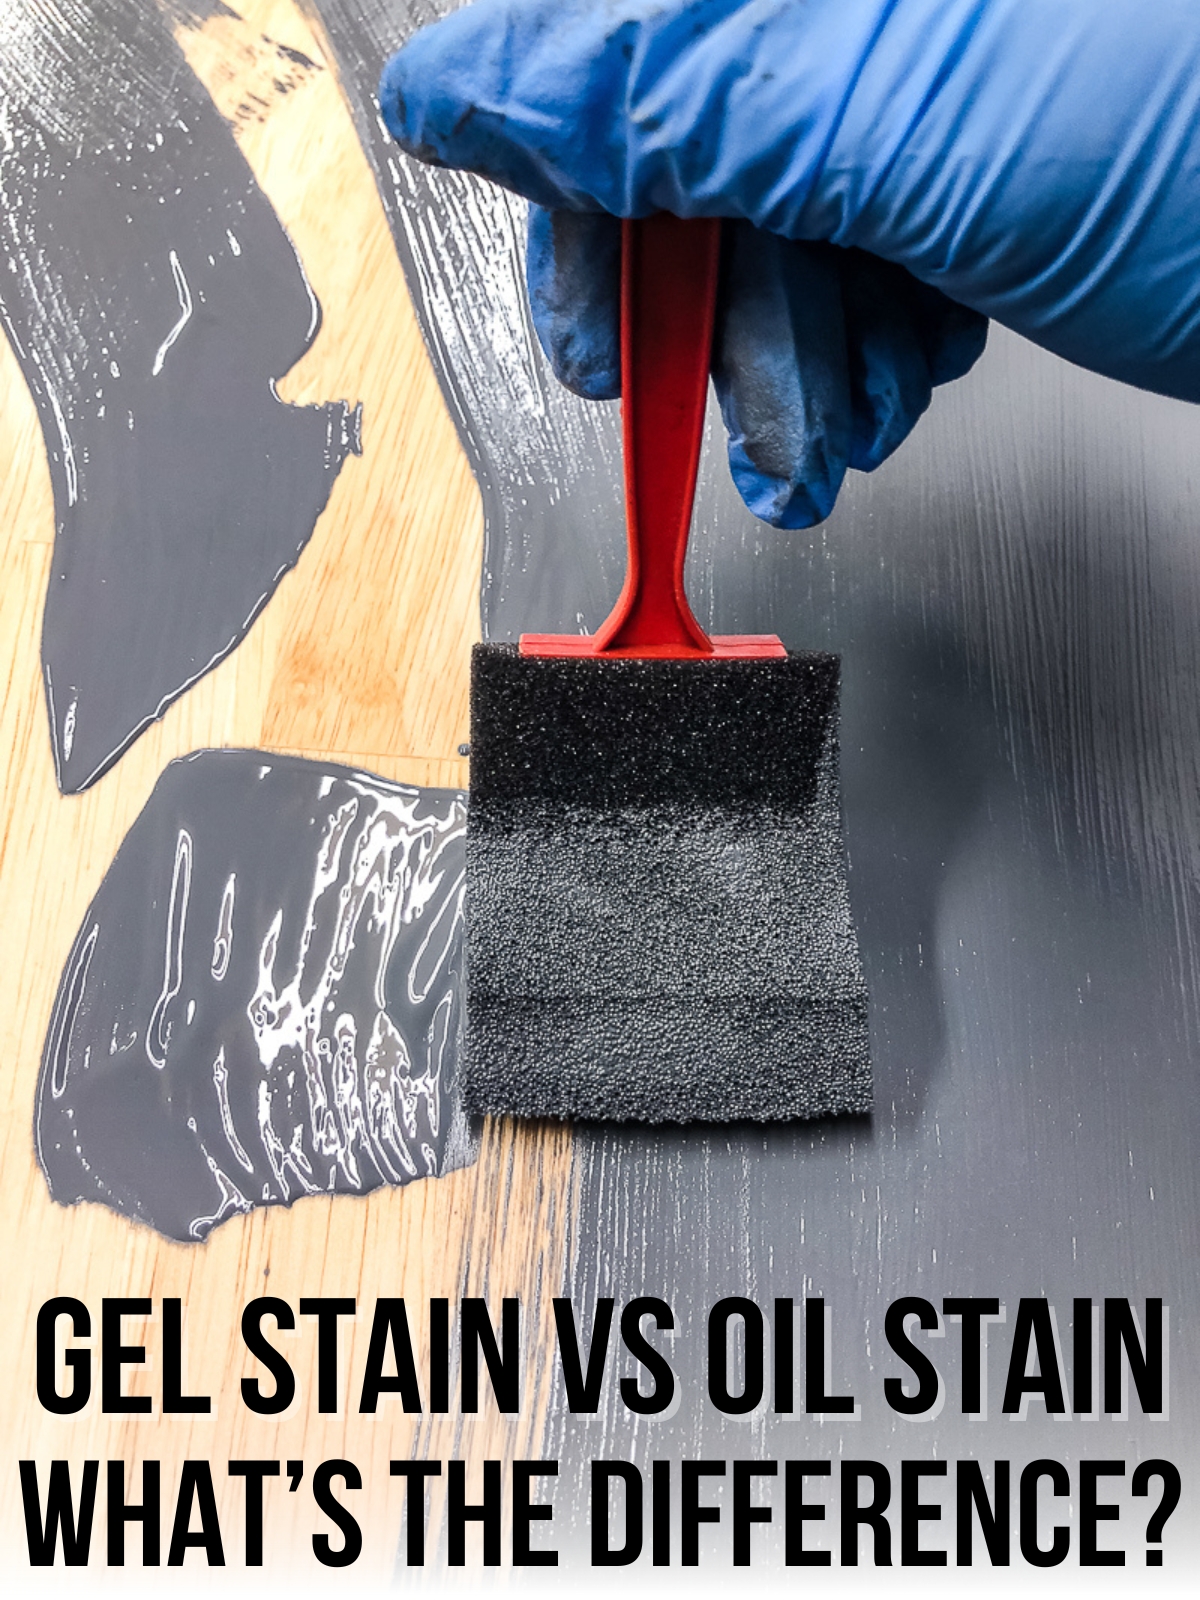 gel stain vs oil stain - what's the difference?